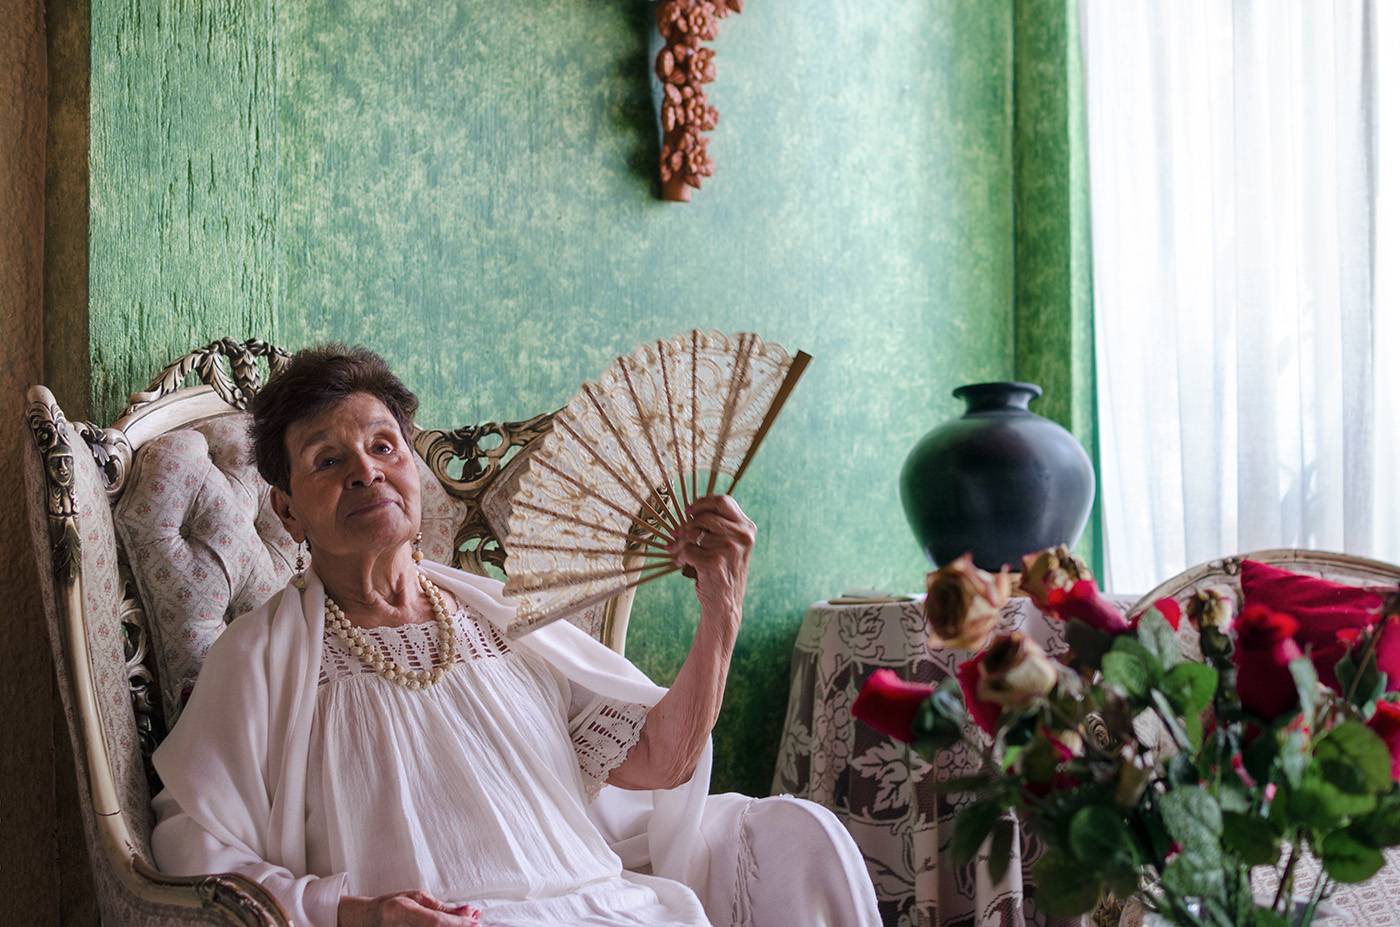 Stylish Mexican old lady with a fan in her house full of antique things